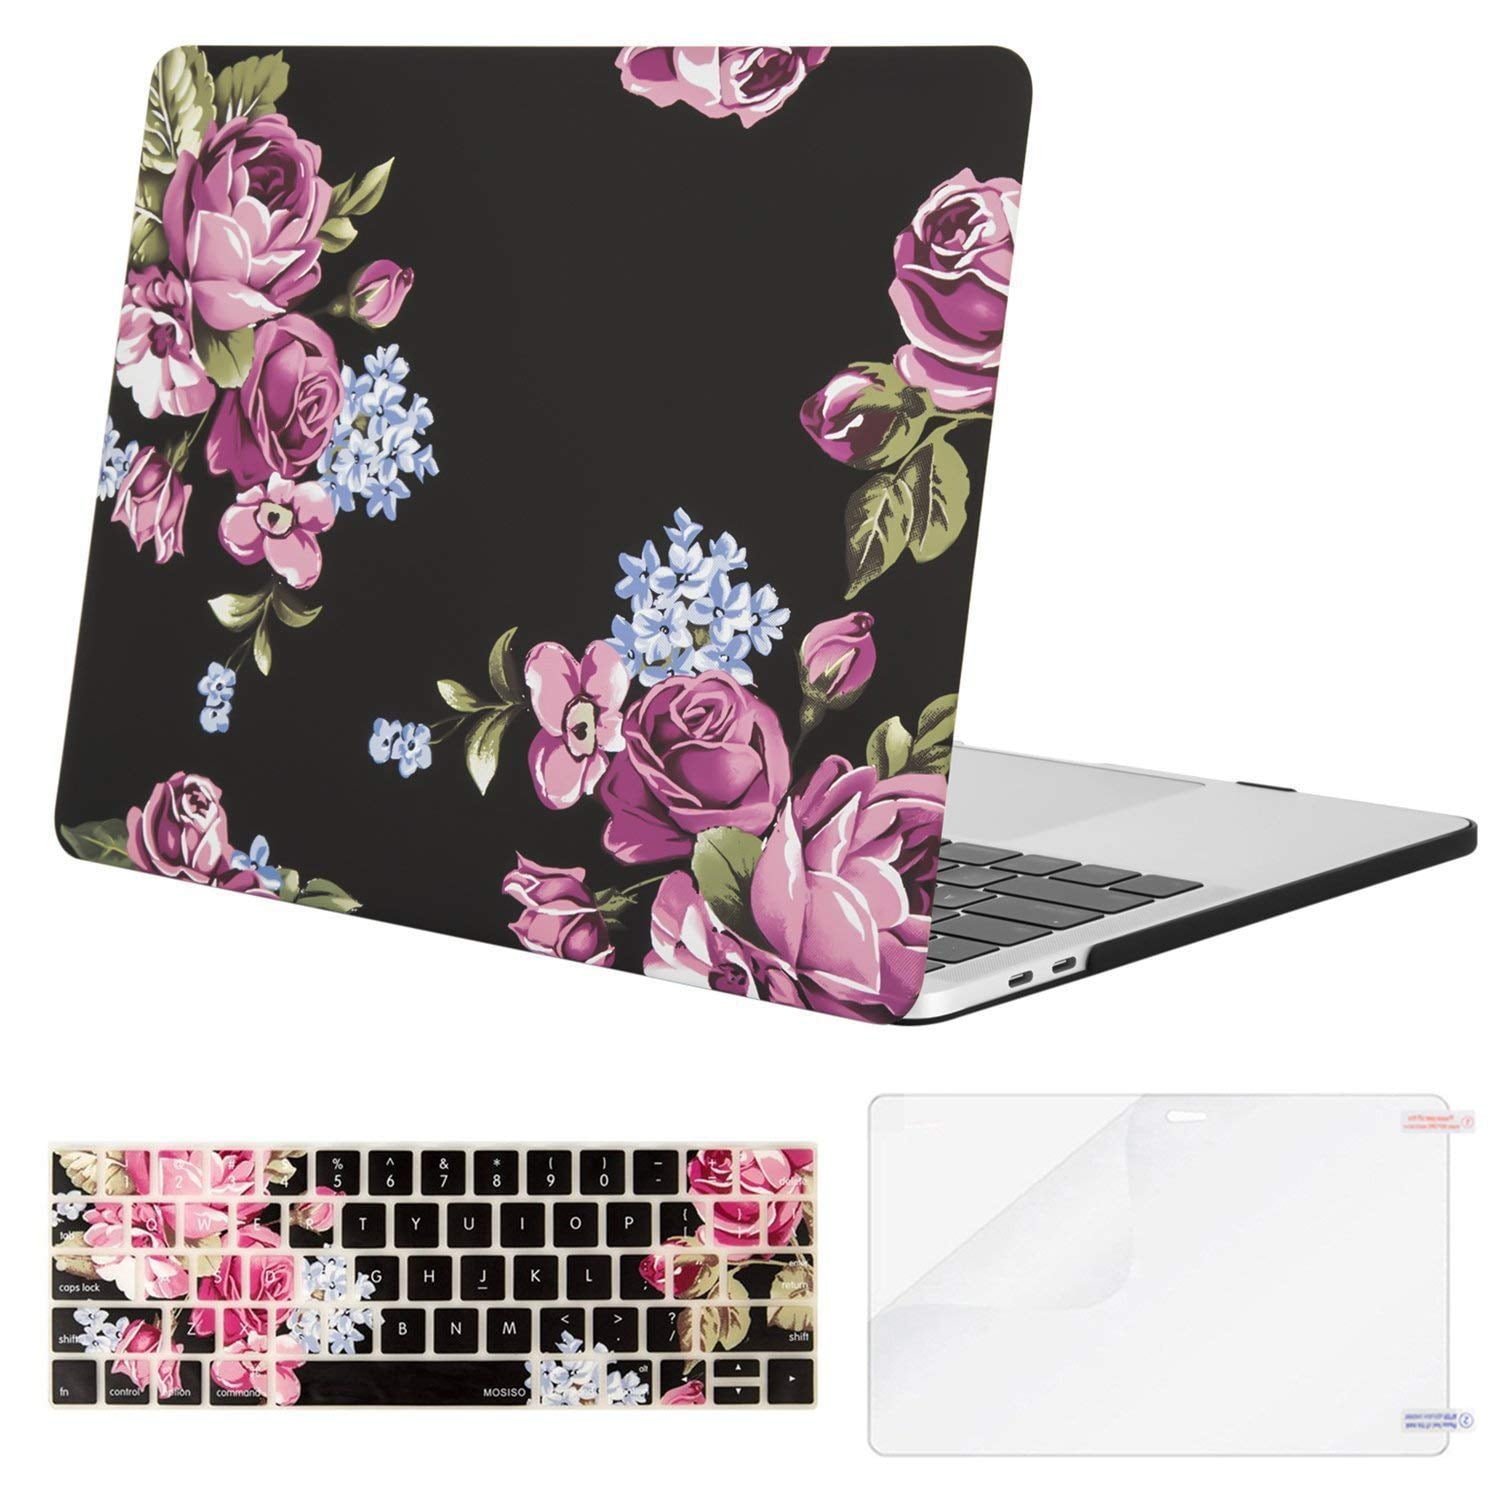 13 Diagonally Keyboard Cover for MacBook Pro 13 2 in 1 A1708 Without Touch Bar Cherry Blossom 2017 & 2016 Release TOP CASE Floral Pattern Matte Hard Case MacBook Pro 13 Without Touch Bar 